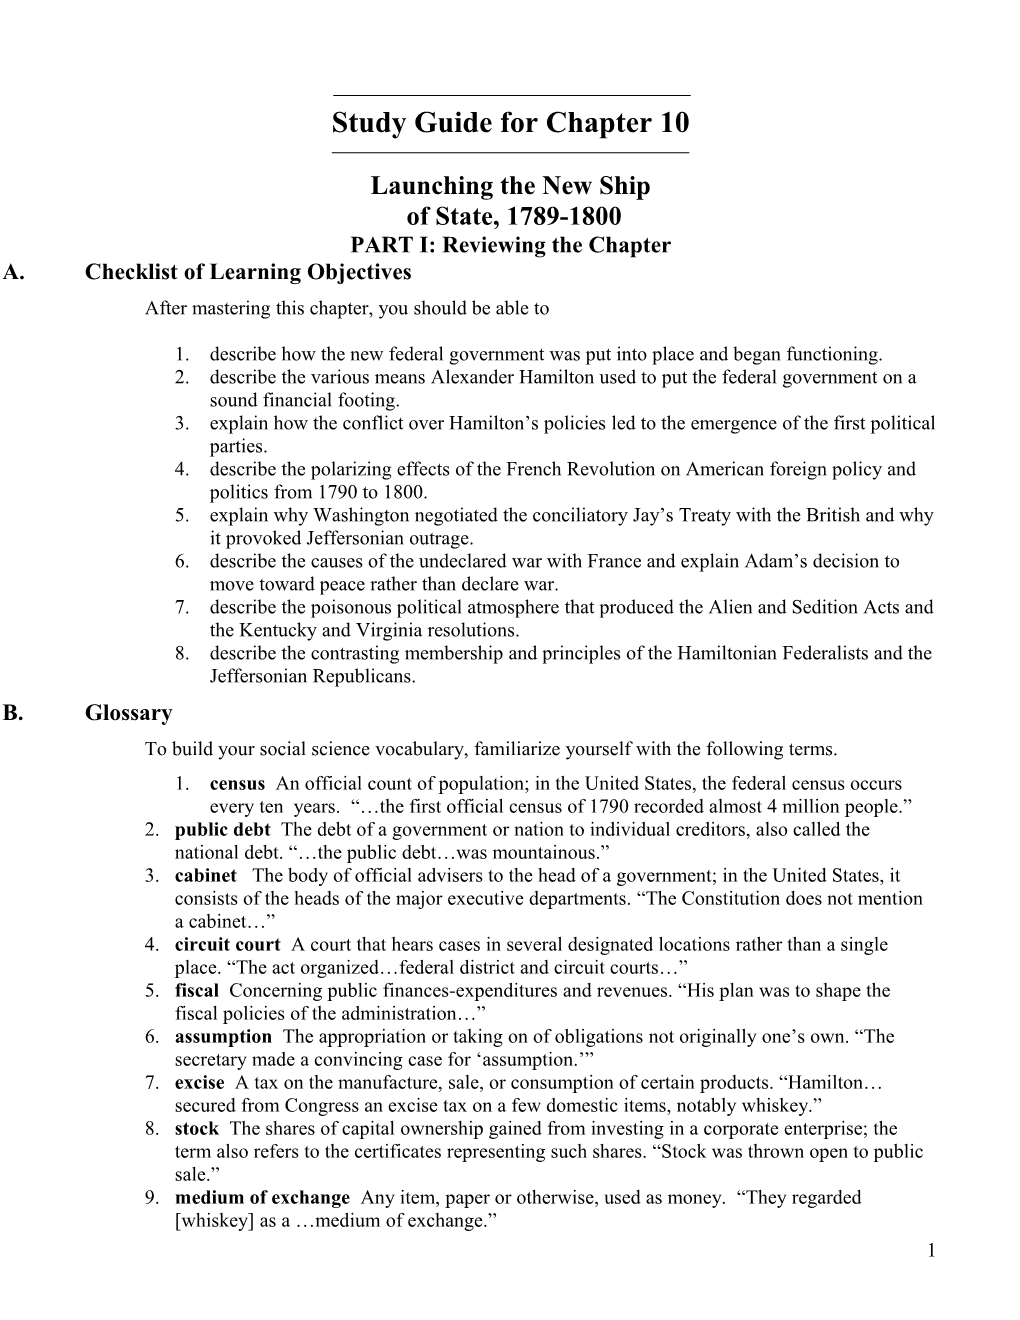 Study Guide for Chapter 10